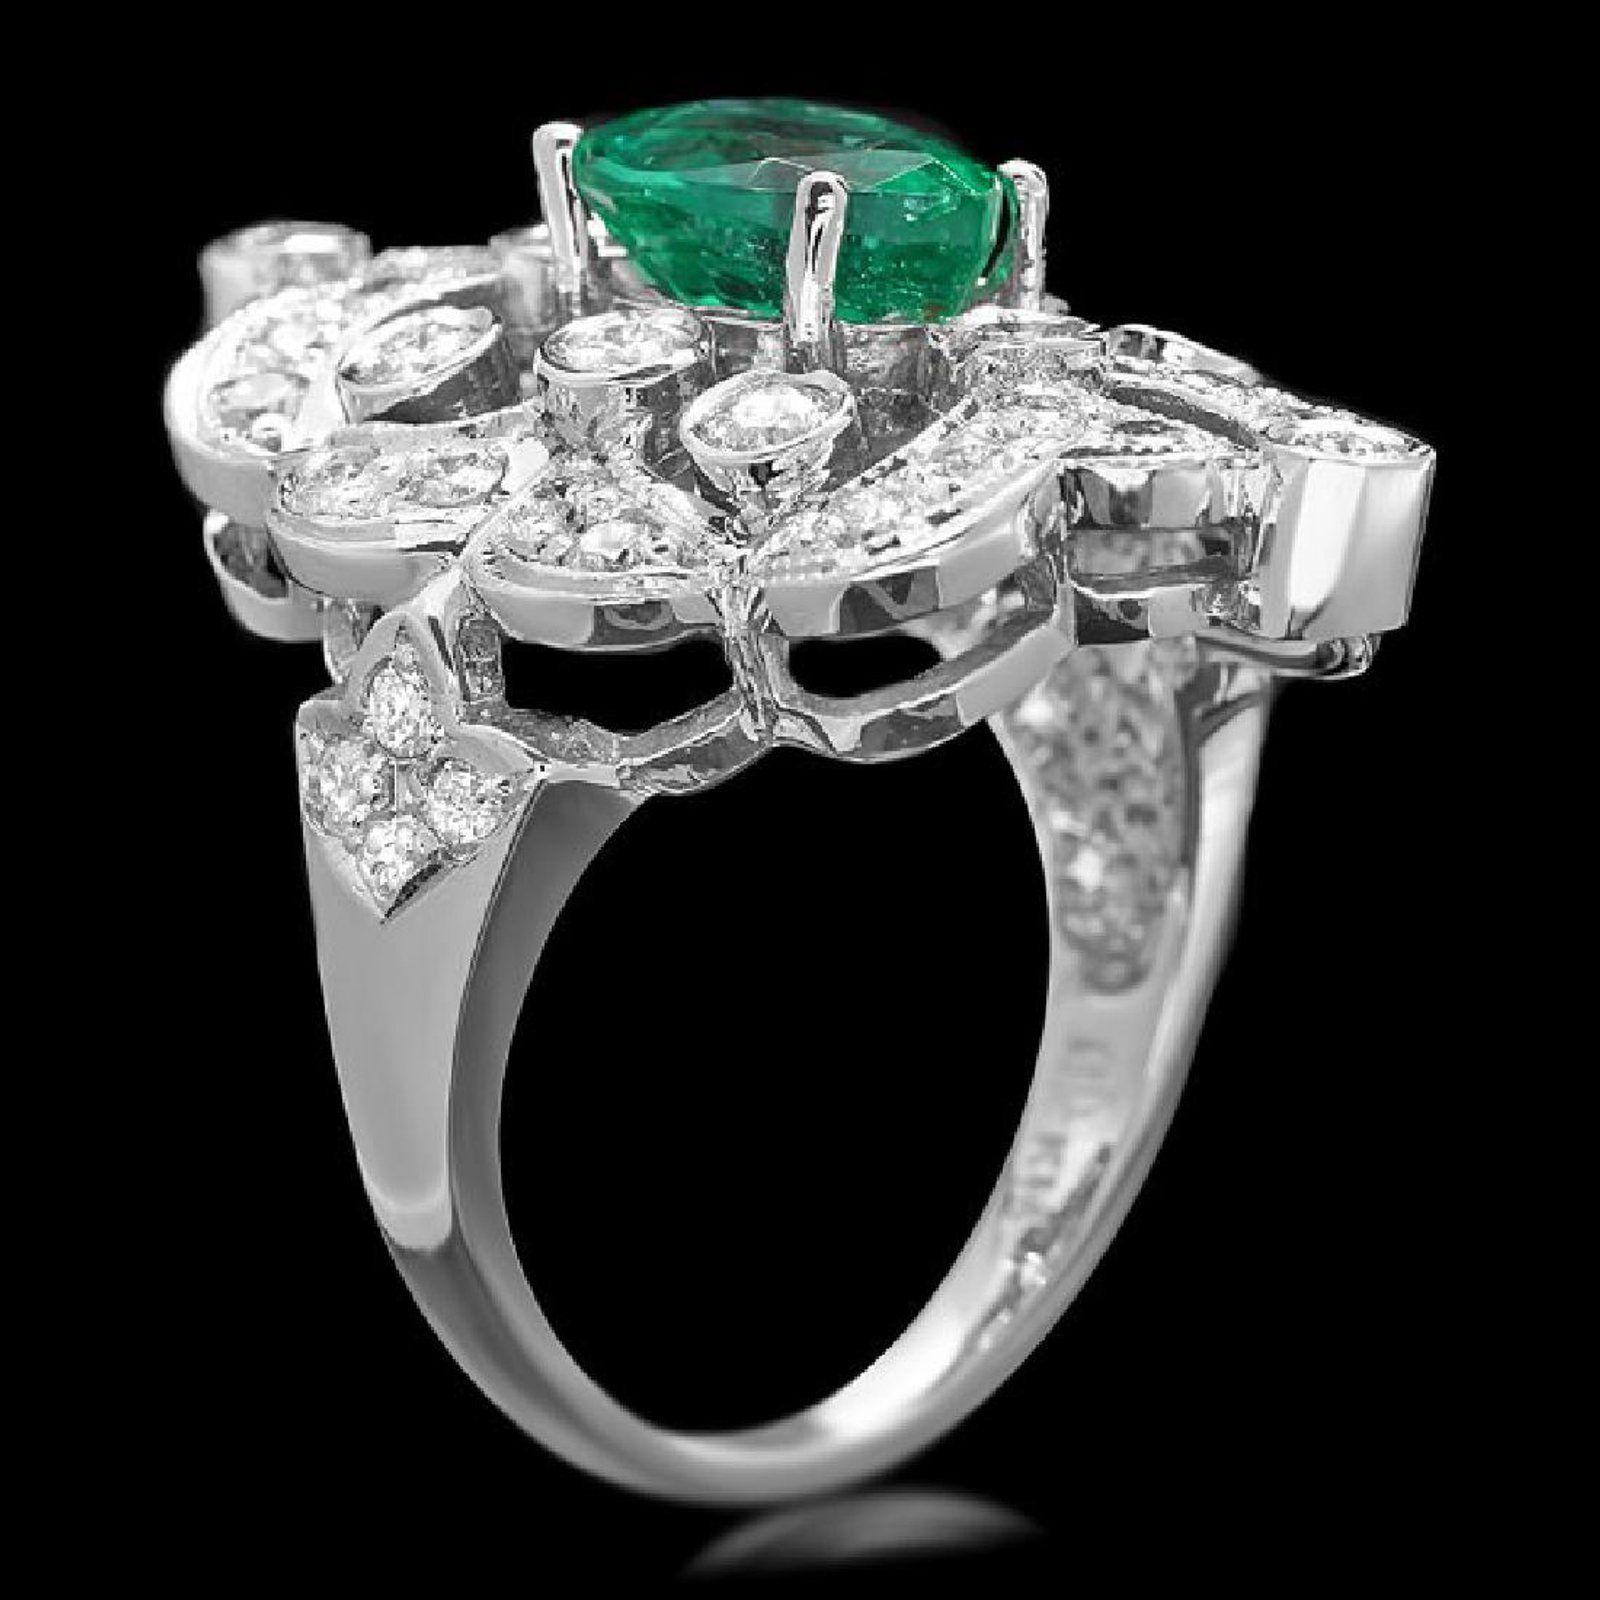 3.25 Carats Natural Emerald and Diamond 14K Solid White Gold Ring

Total Natural Green Emerald Weight is: Approx. 2.00 Carats (transparent)

Emerald Measures: Approx. 9.00 x 7.00mm

Emerald Treatment: Oiling

Natural Round Diamonds Weight: Approx.